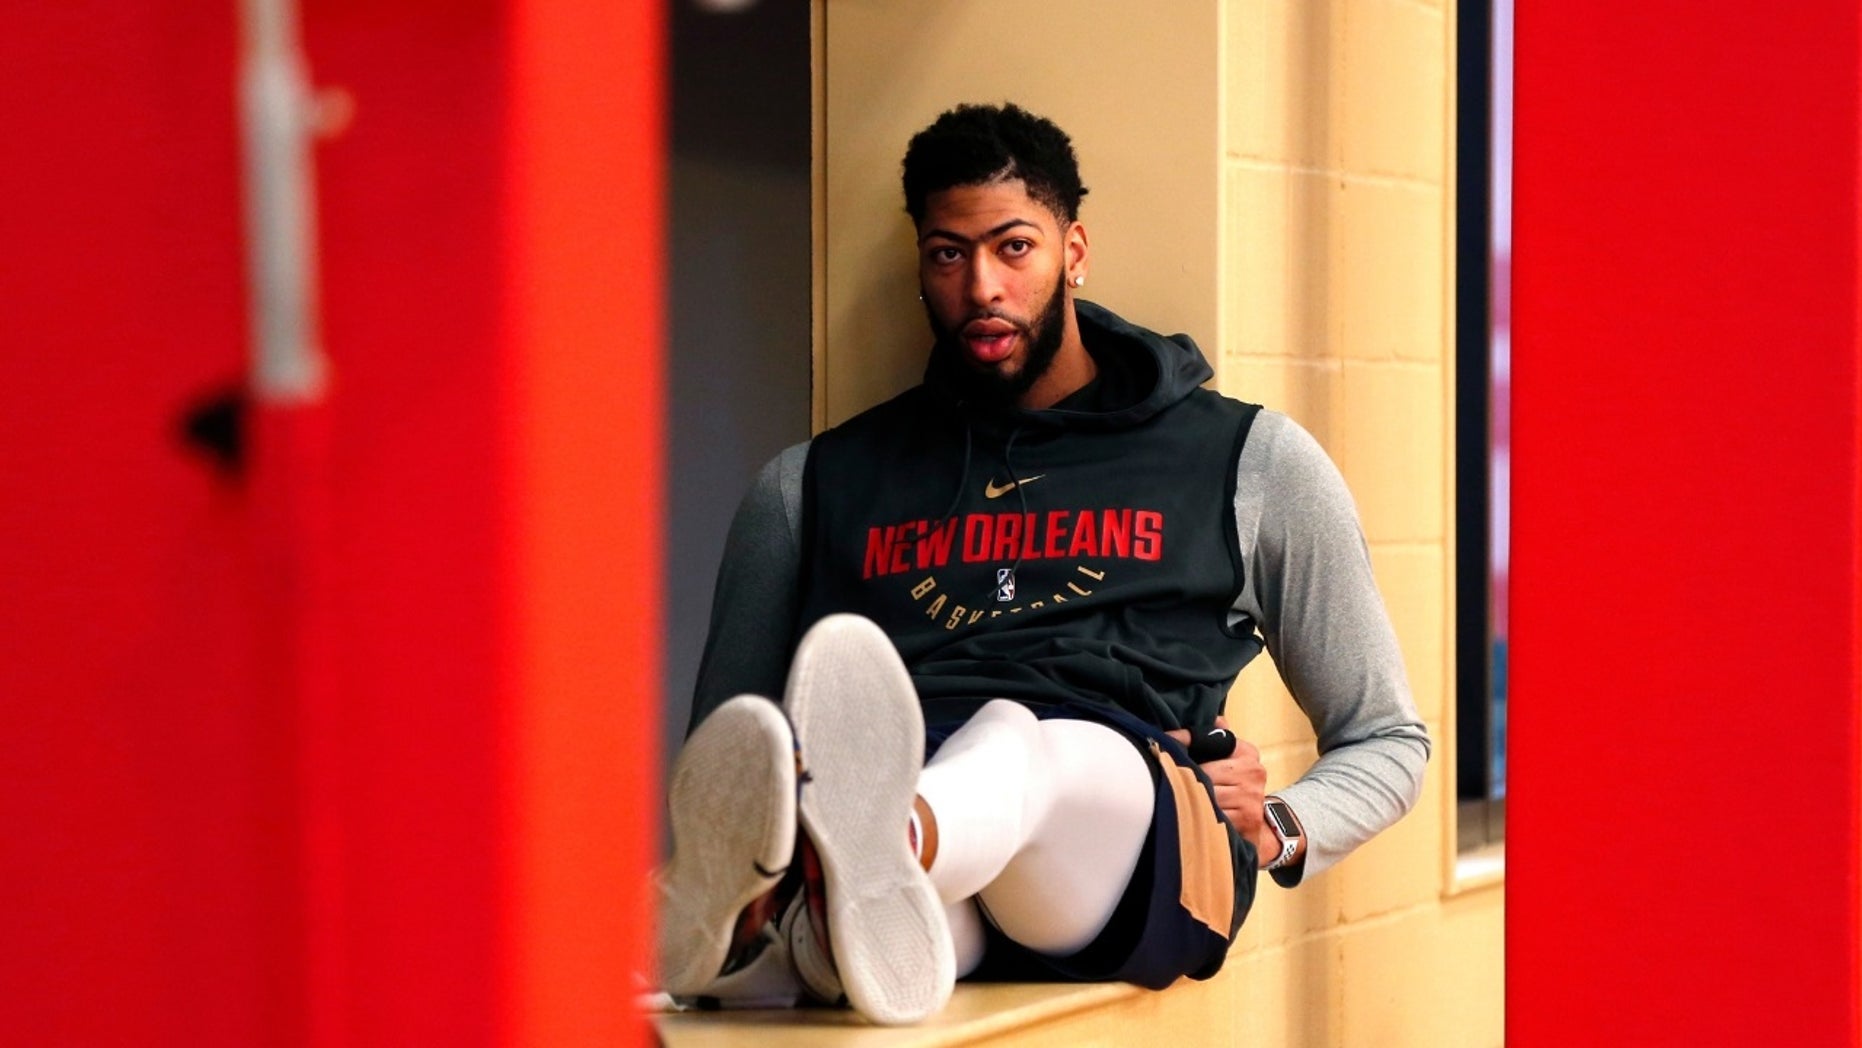 Anthony Davis’ dad says he doesn’t want son playing on Boston Celtics